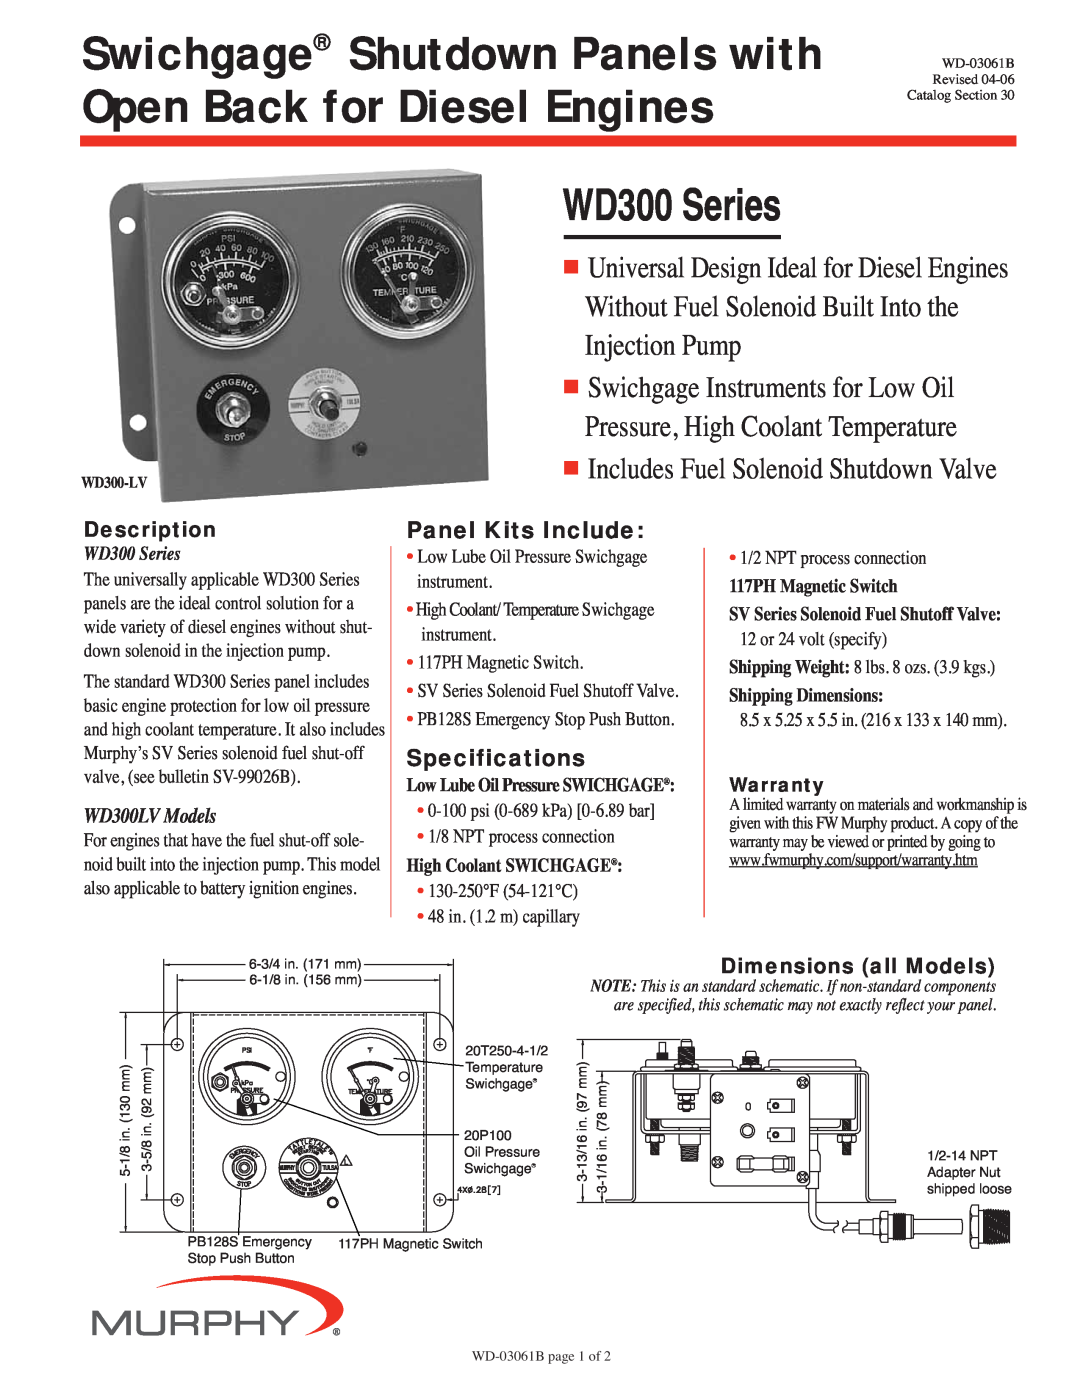 Murphy WD300 Series specifications Description, Dimensions all Models, WD300-LV, Includes Fuel Solenoid Shutdown Valve 